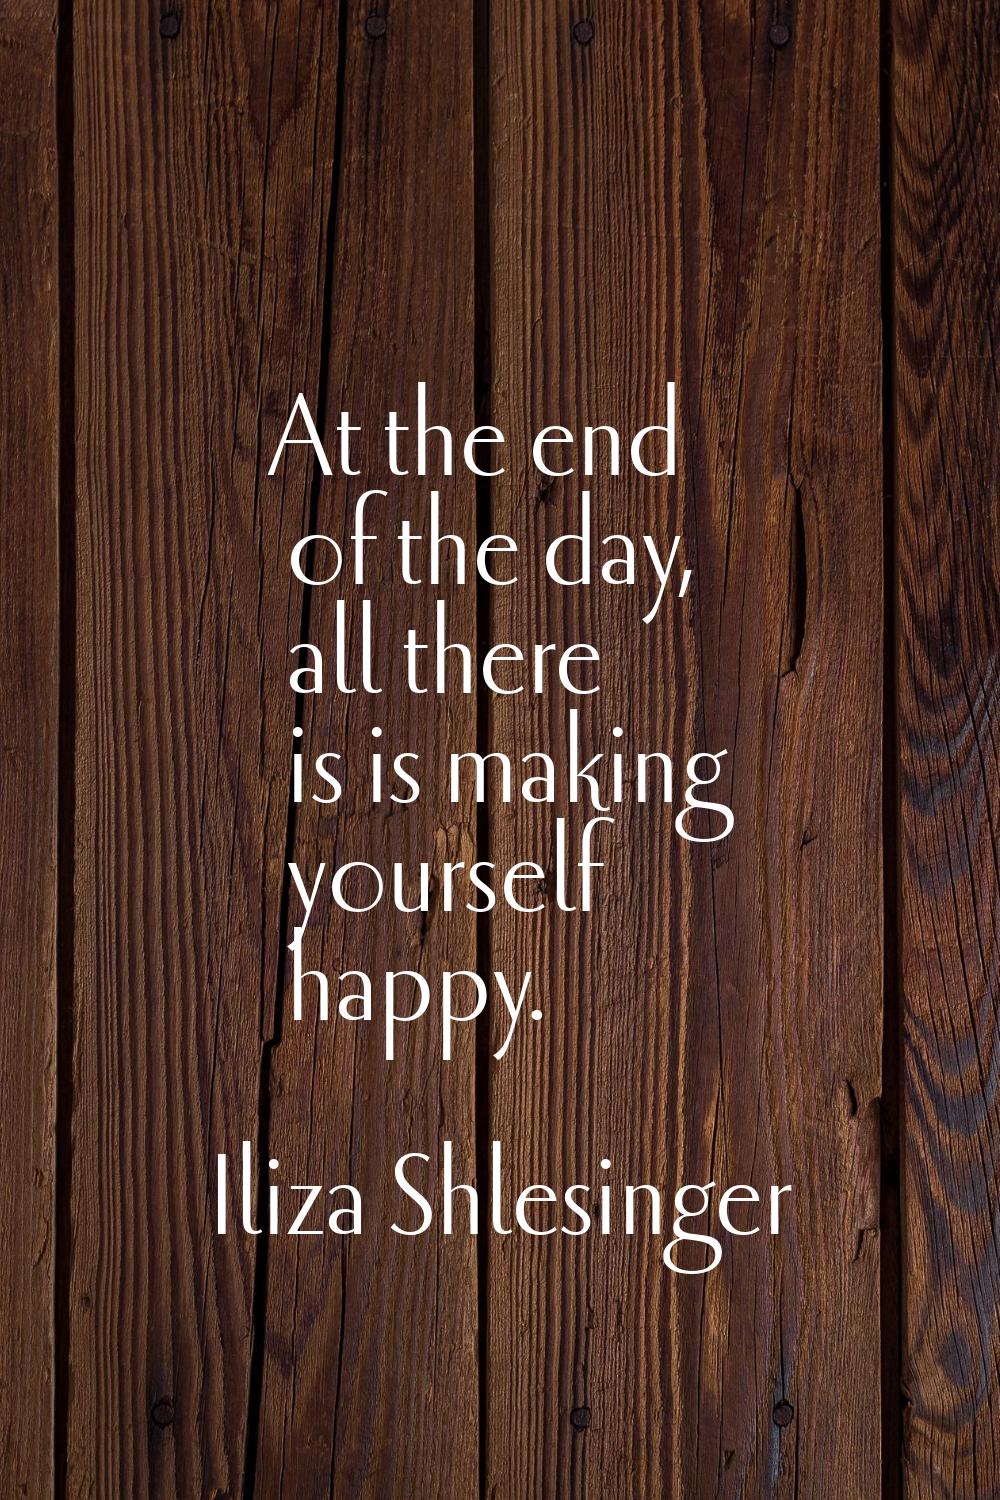 At the end of the day, all there is is making yourself happy.